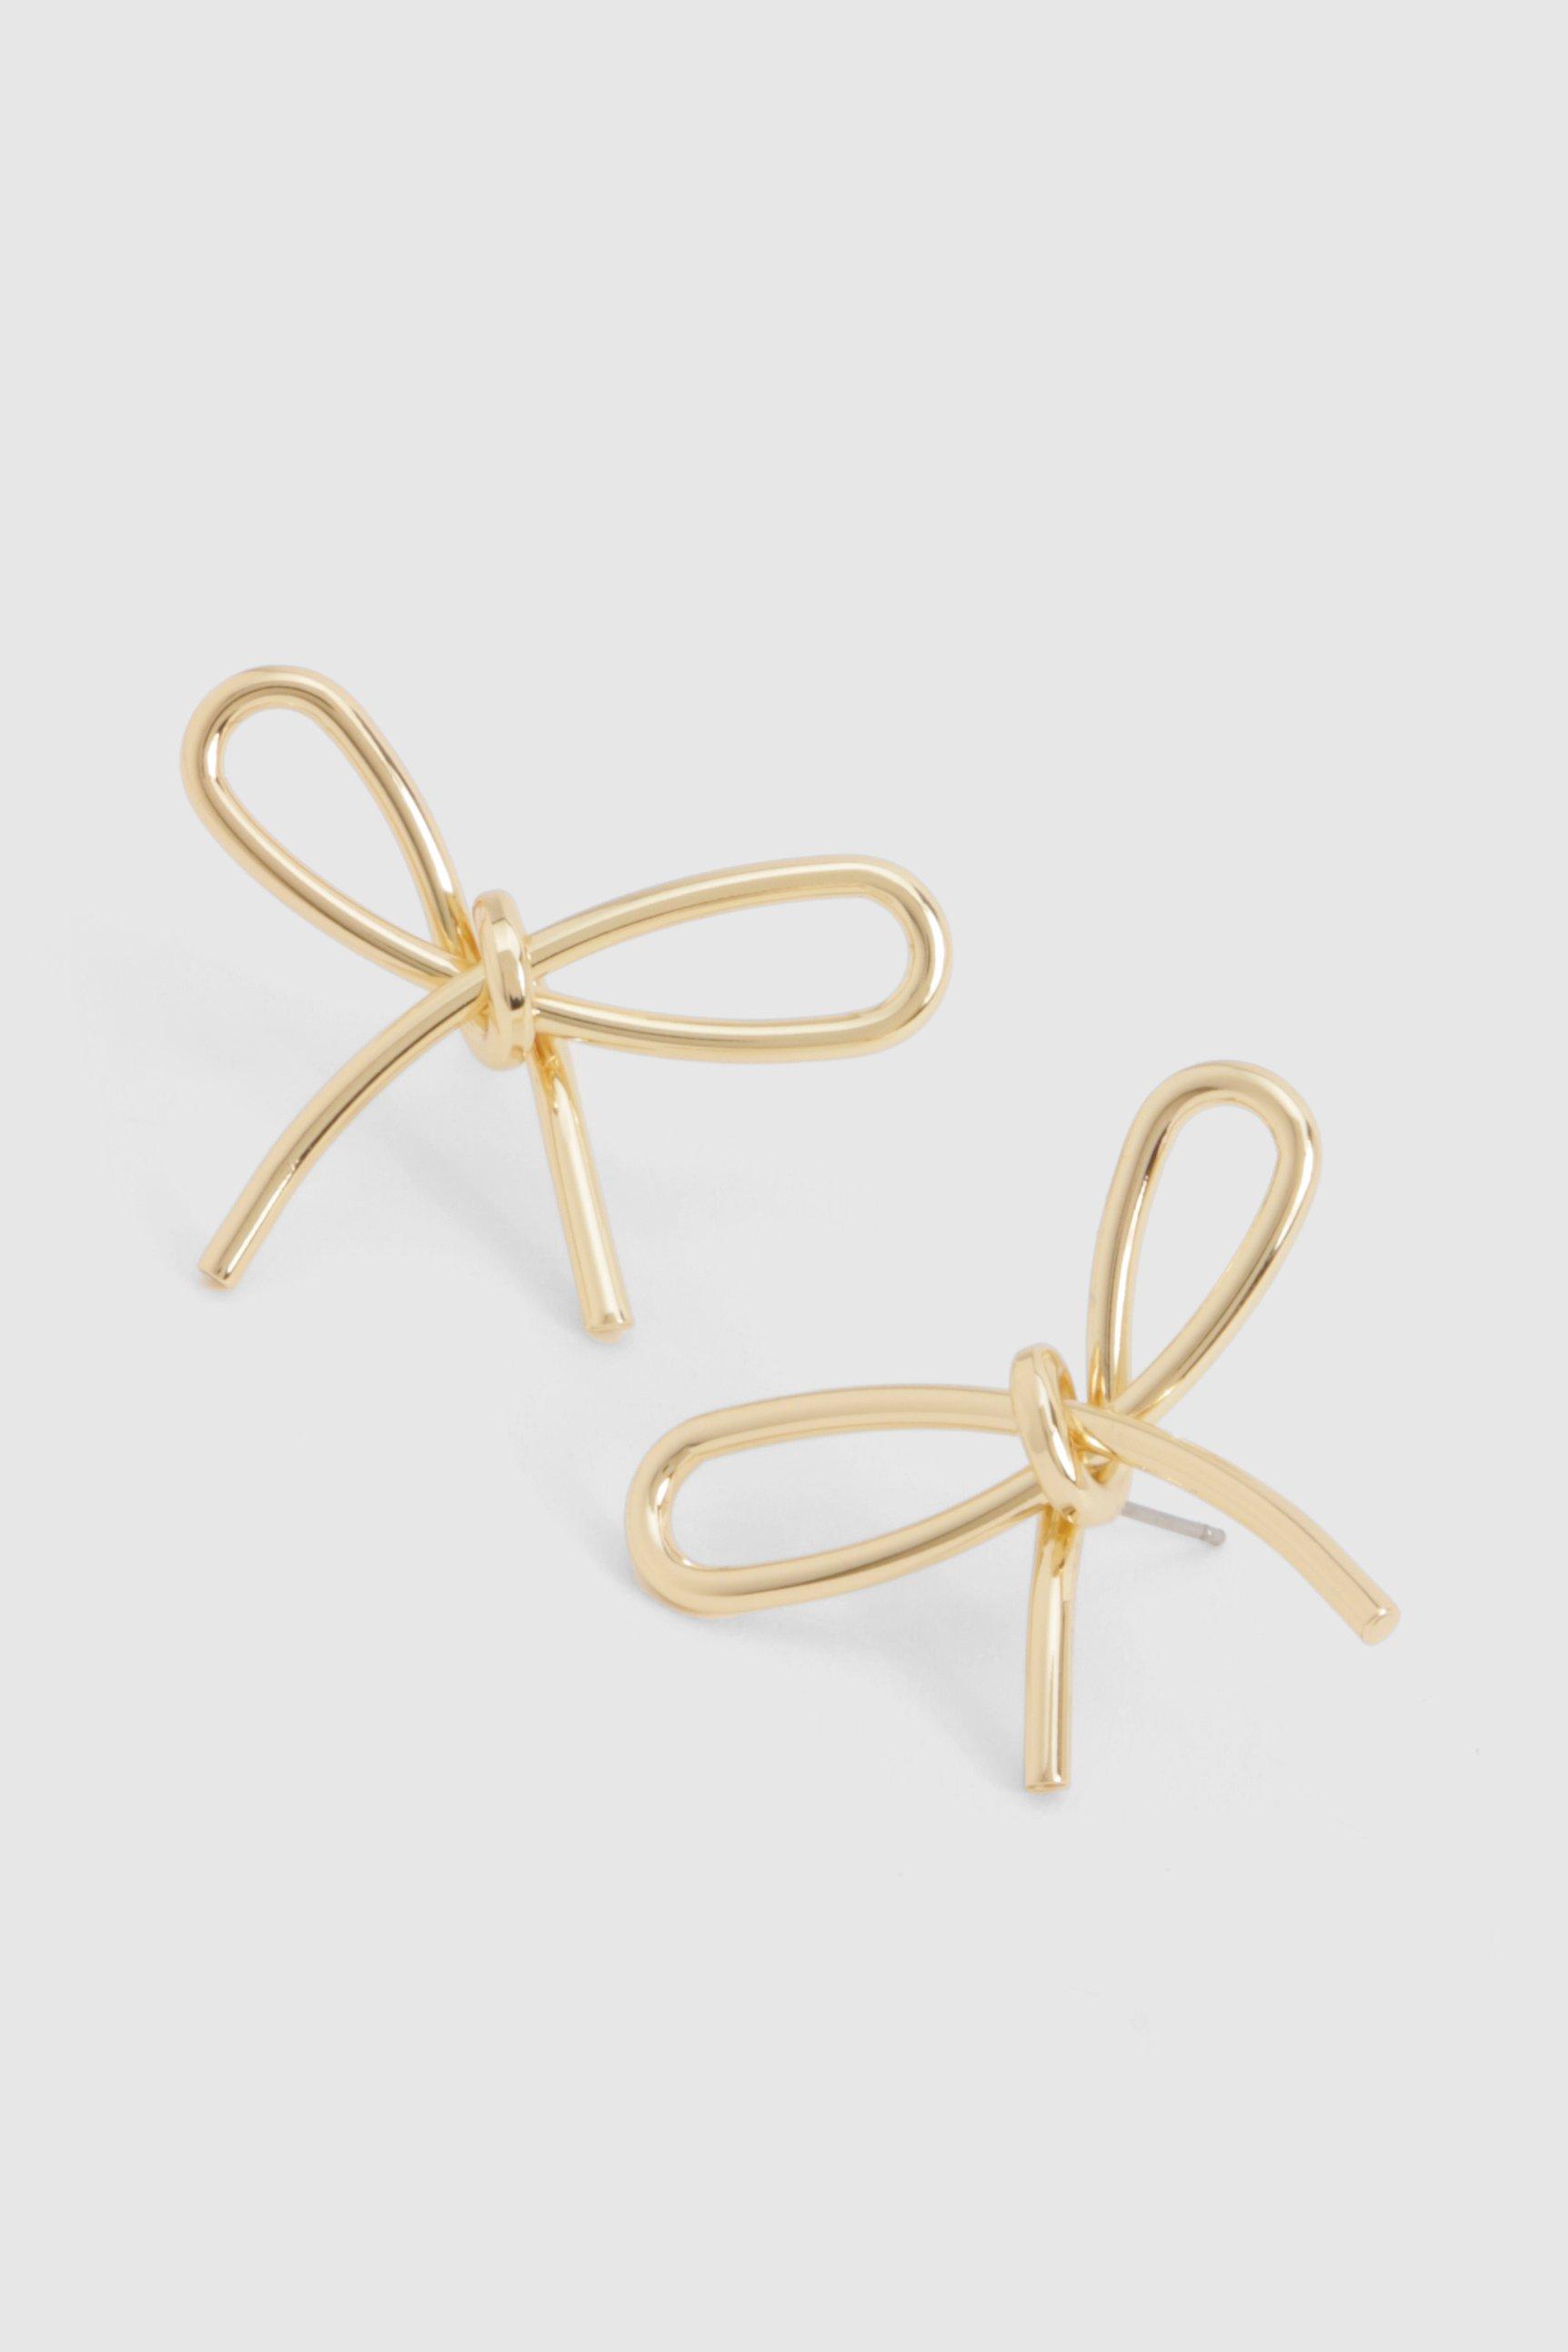 Image of Statement Knot Bow Earrings, Metallics